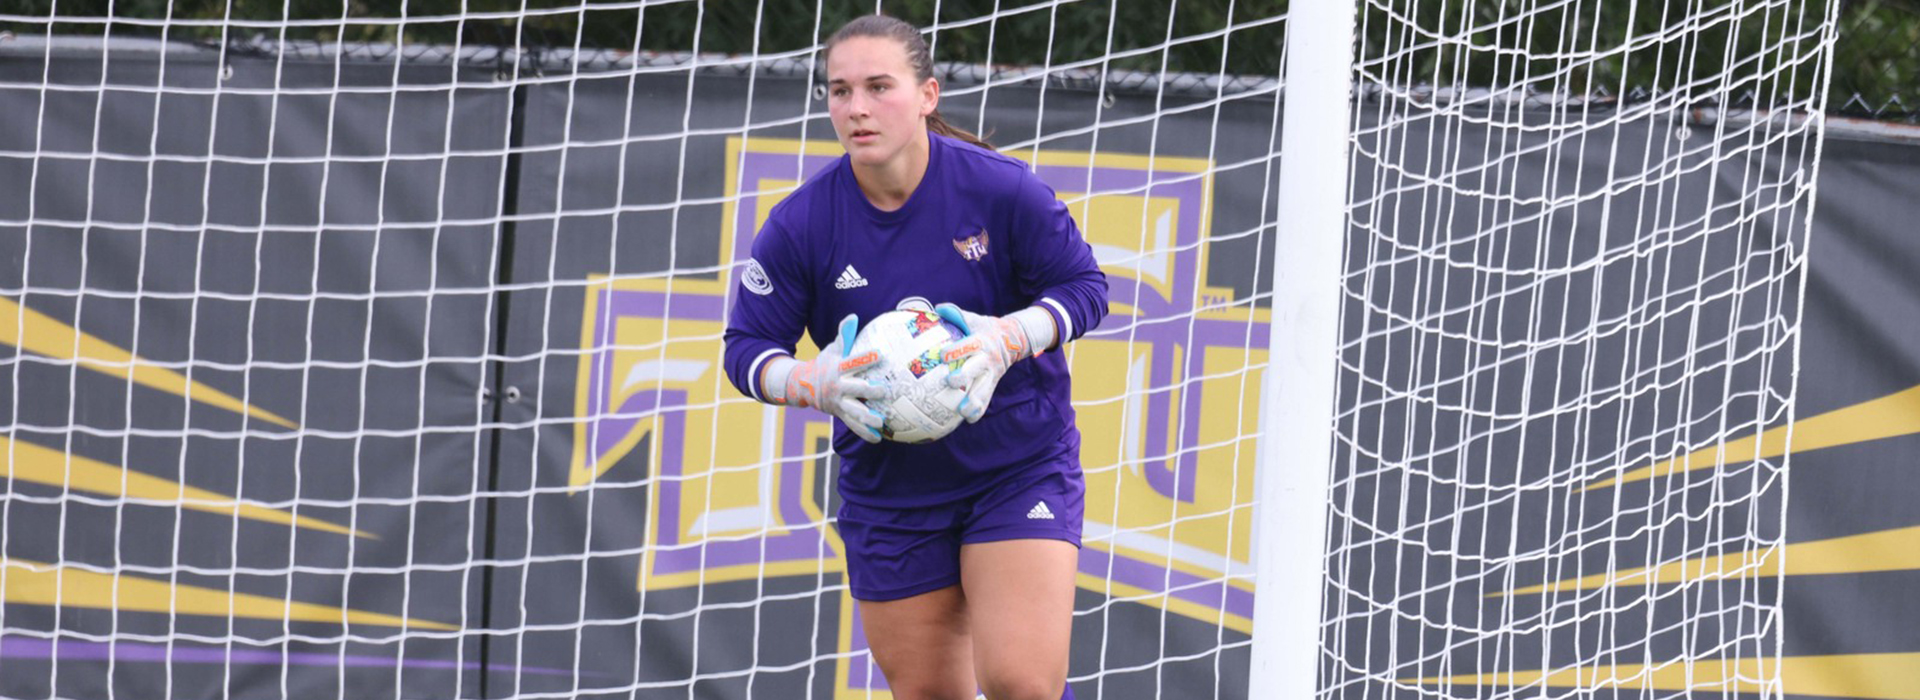 Golden Eagles welcome Eastern Illinois to Cookeville for Sunday matchup at Tech Soccer Field